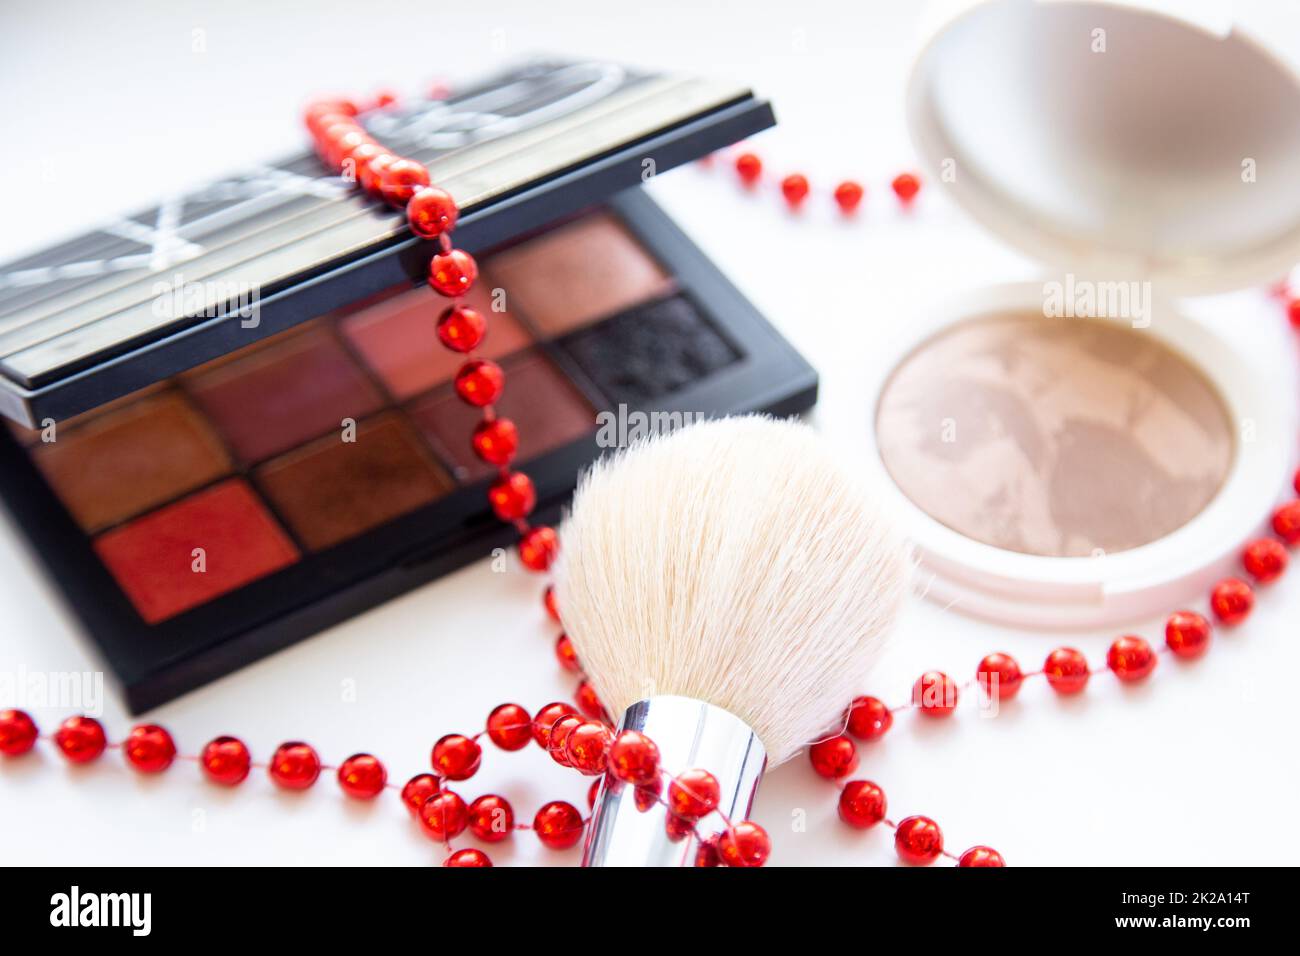 The white face powder and bronzer, black packaging with a eyeshadow brush and lying on a white background, braid with red beads closeup Stock Photo